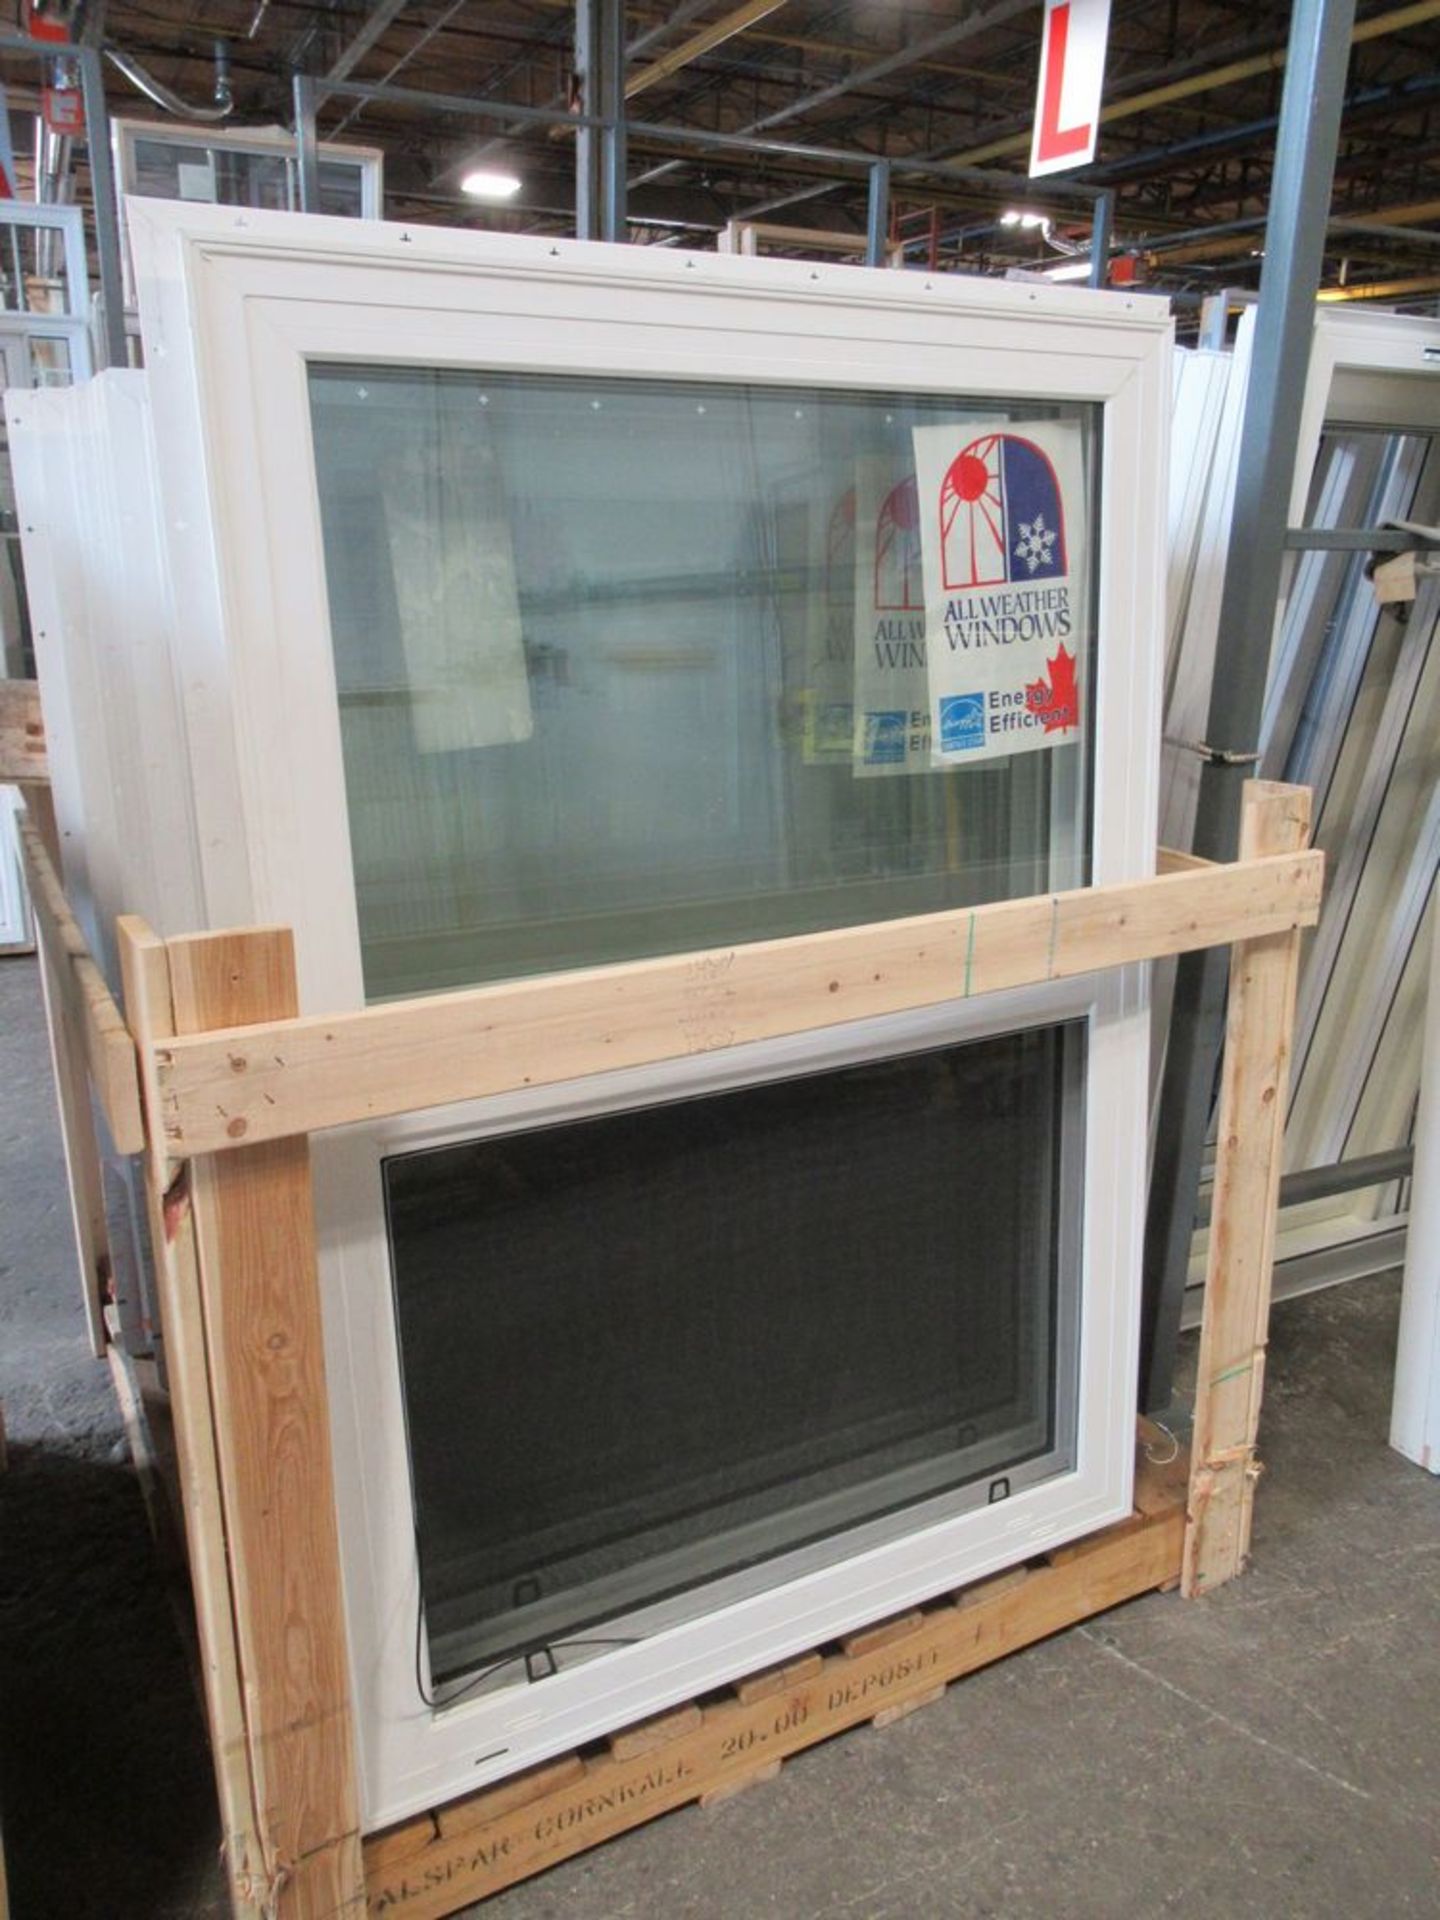 10PC ASST 7 PCS 47.5" X 39.5 APPROX, 3-51"X 36" APPROX. WHITE SIDE SLIDER WINDOWS, ETC, 1 CRATE - Image 2 of 2